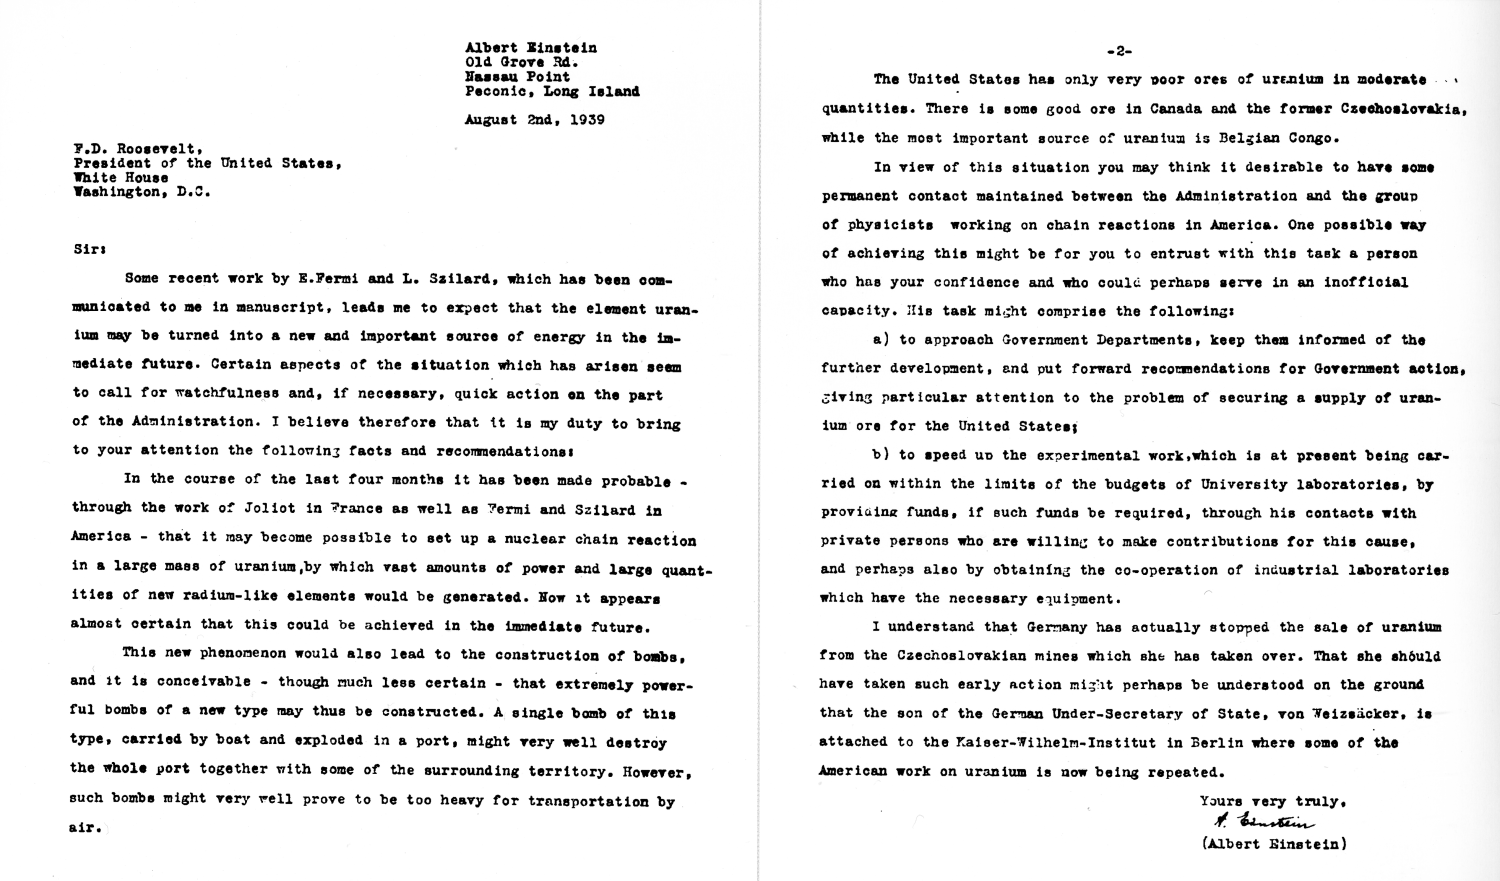 Scan of the letter sent to U.S. President Franklin D. Roosevelt on August 2, 1939, was signed by Albert Einstein but largely written by Hungarian physicist Leo Szilard